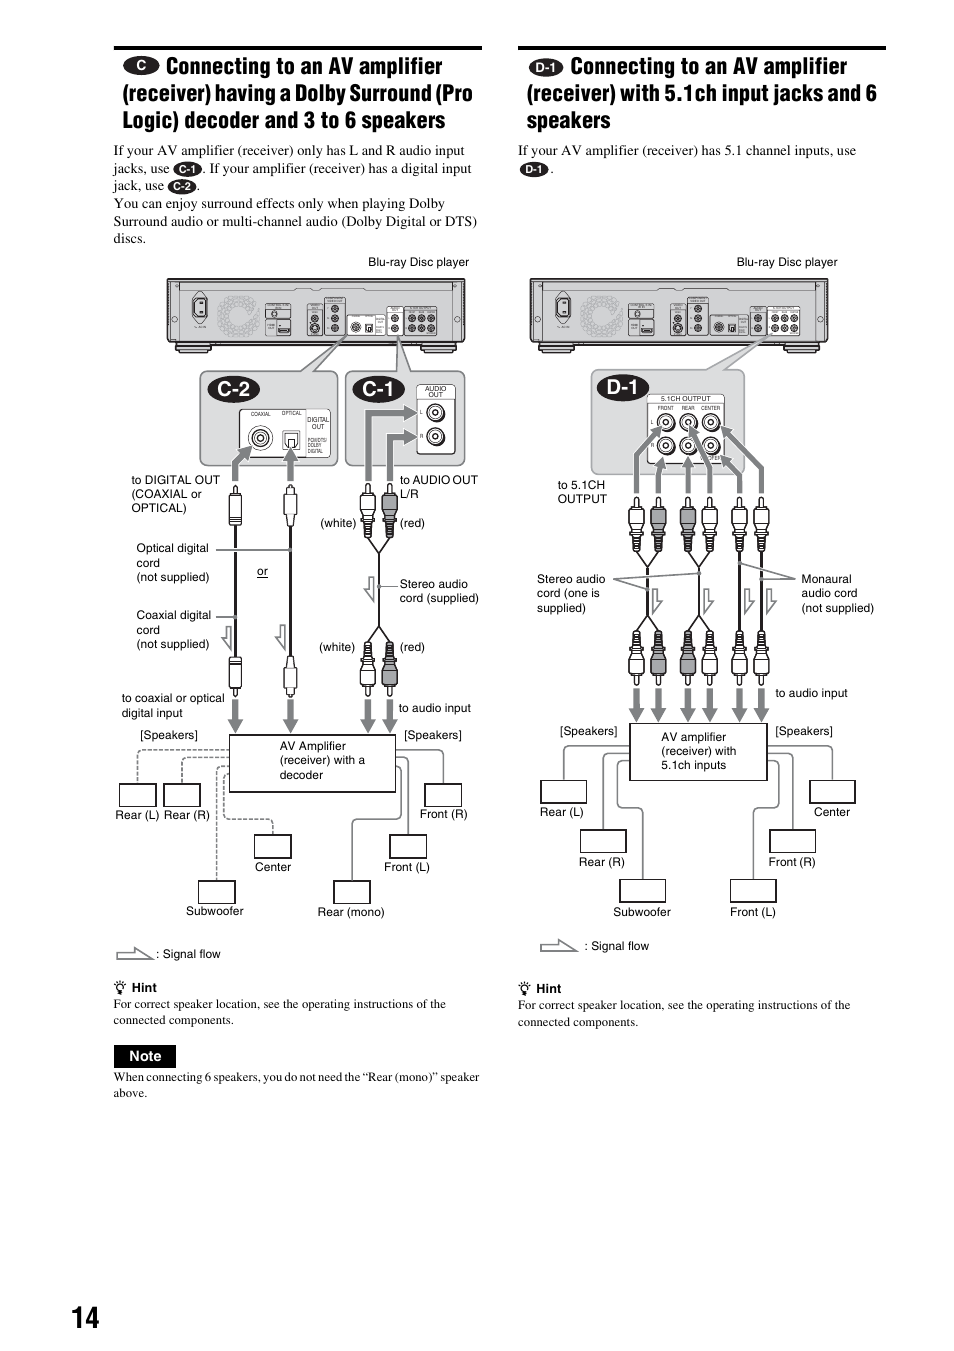 Connecting to an av amplifier (receiver), With 5.1ch input jacks and 6 speakers, C-2 c-1 | Speakers | Sony BDP-S2000ES User Manual | Page 14 / 71